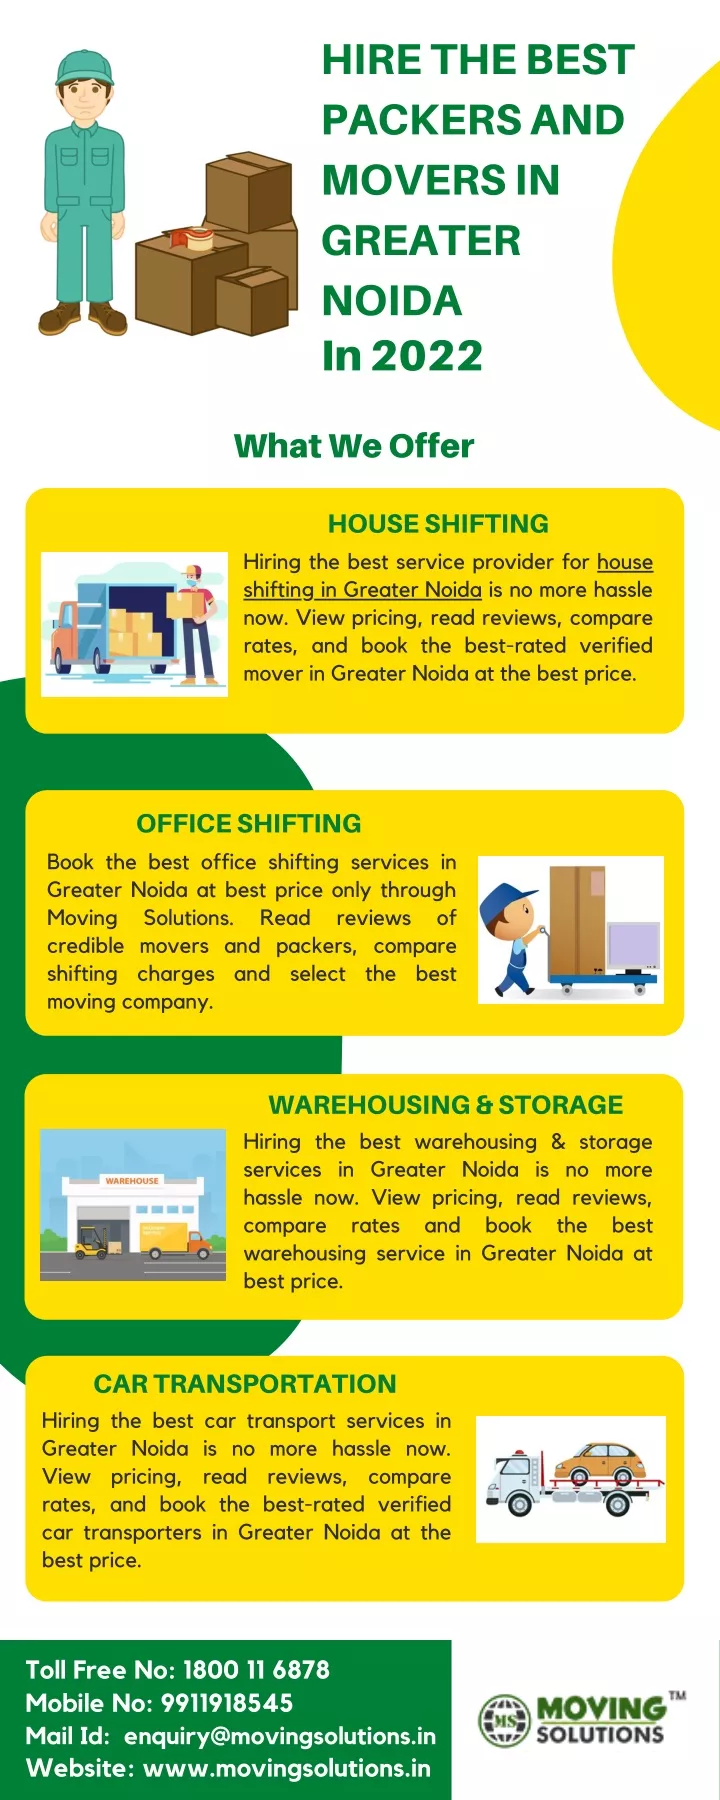 hire the best packers and movers in greater noida